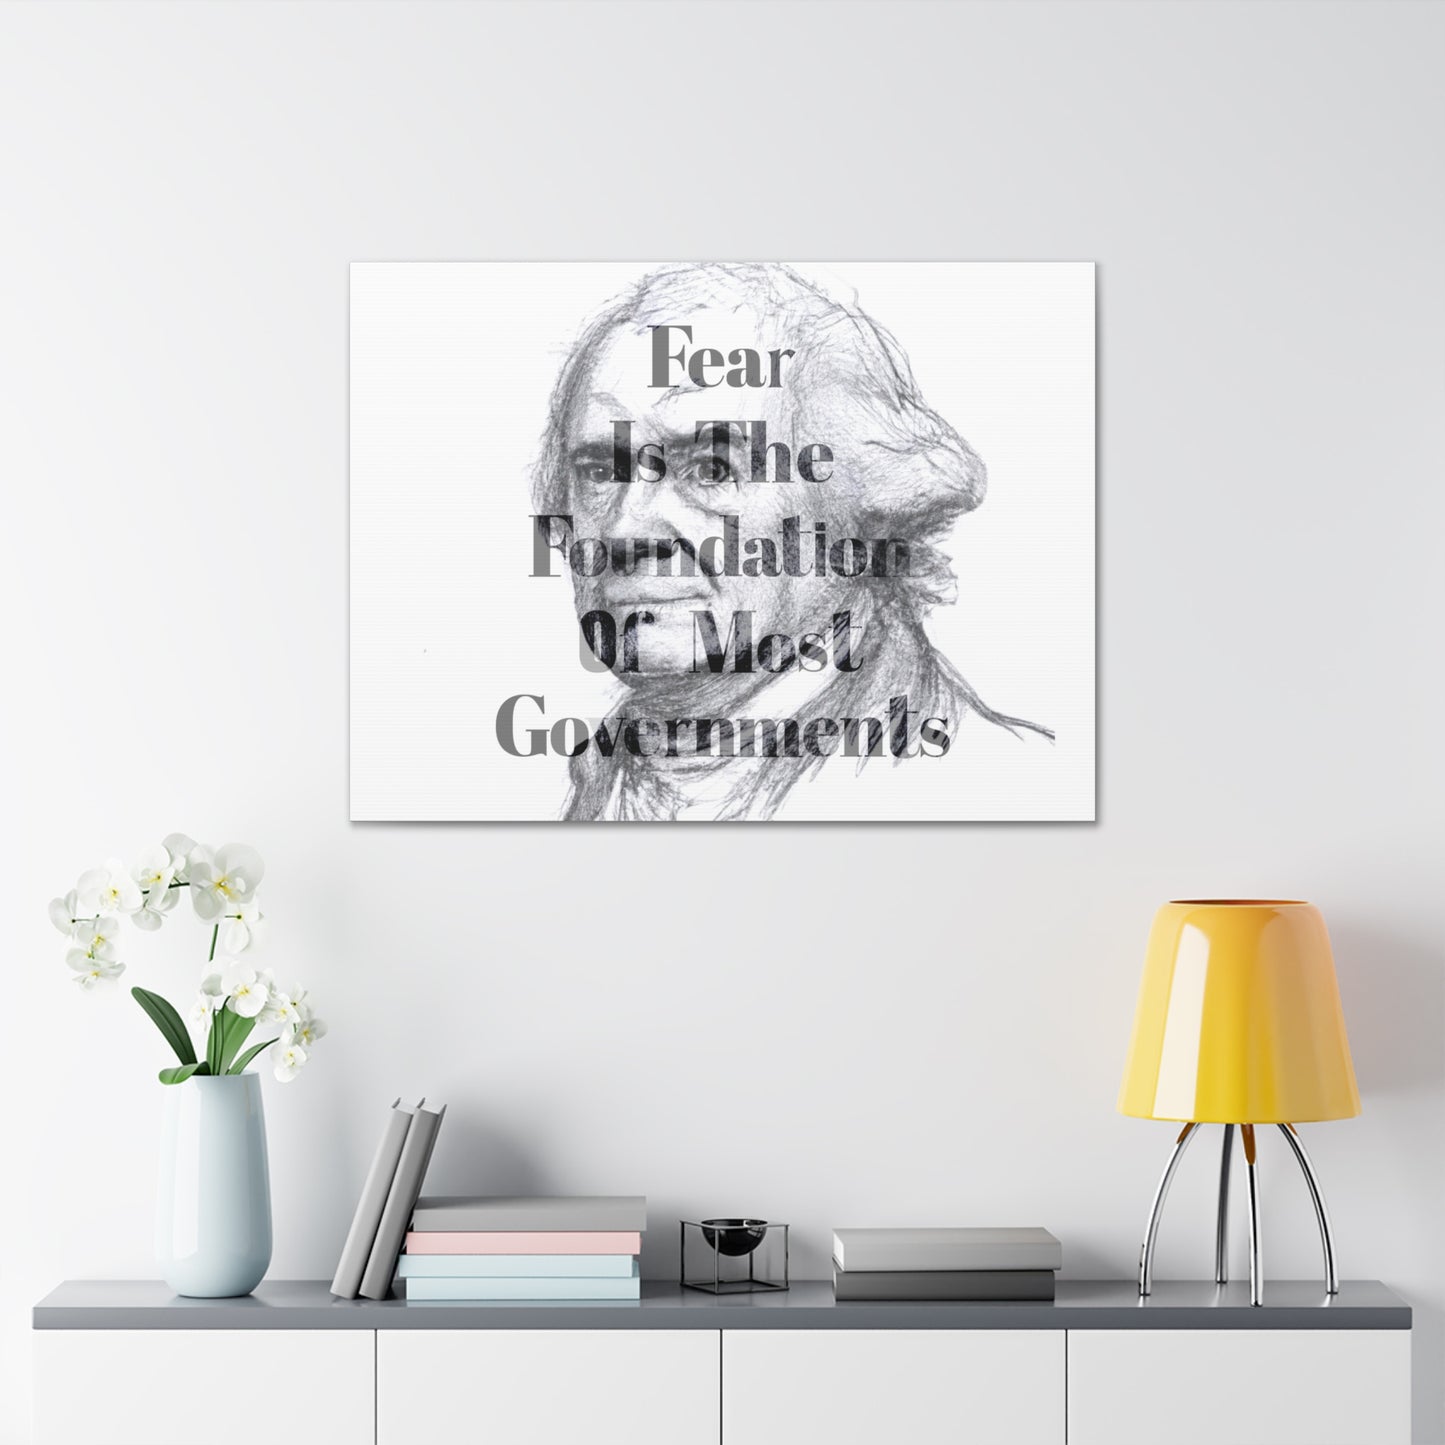 John Adams Quote 3, Canvas Art, Horizontal Light Print, 2nd President of the United States, American Patriots, AI Art, Political Art, Canvas Prints, Presidential Portraits, Presidential Quotes, Inspirational Quotes